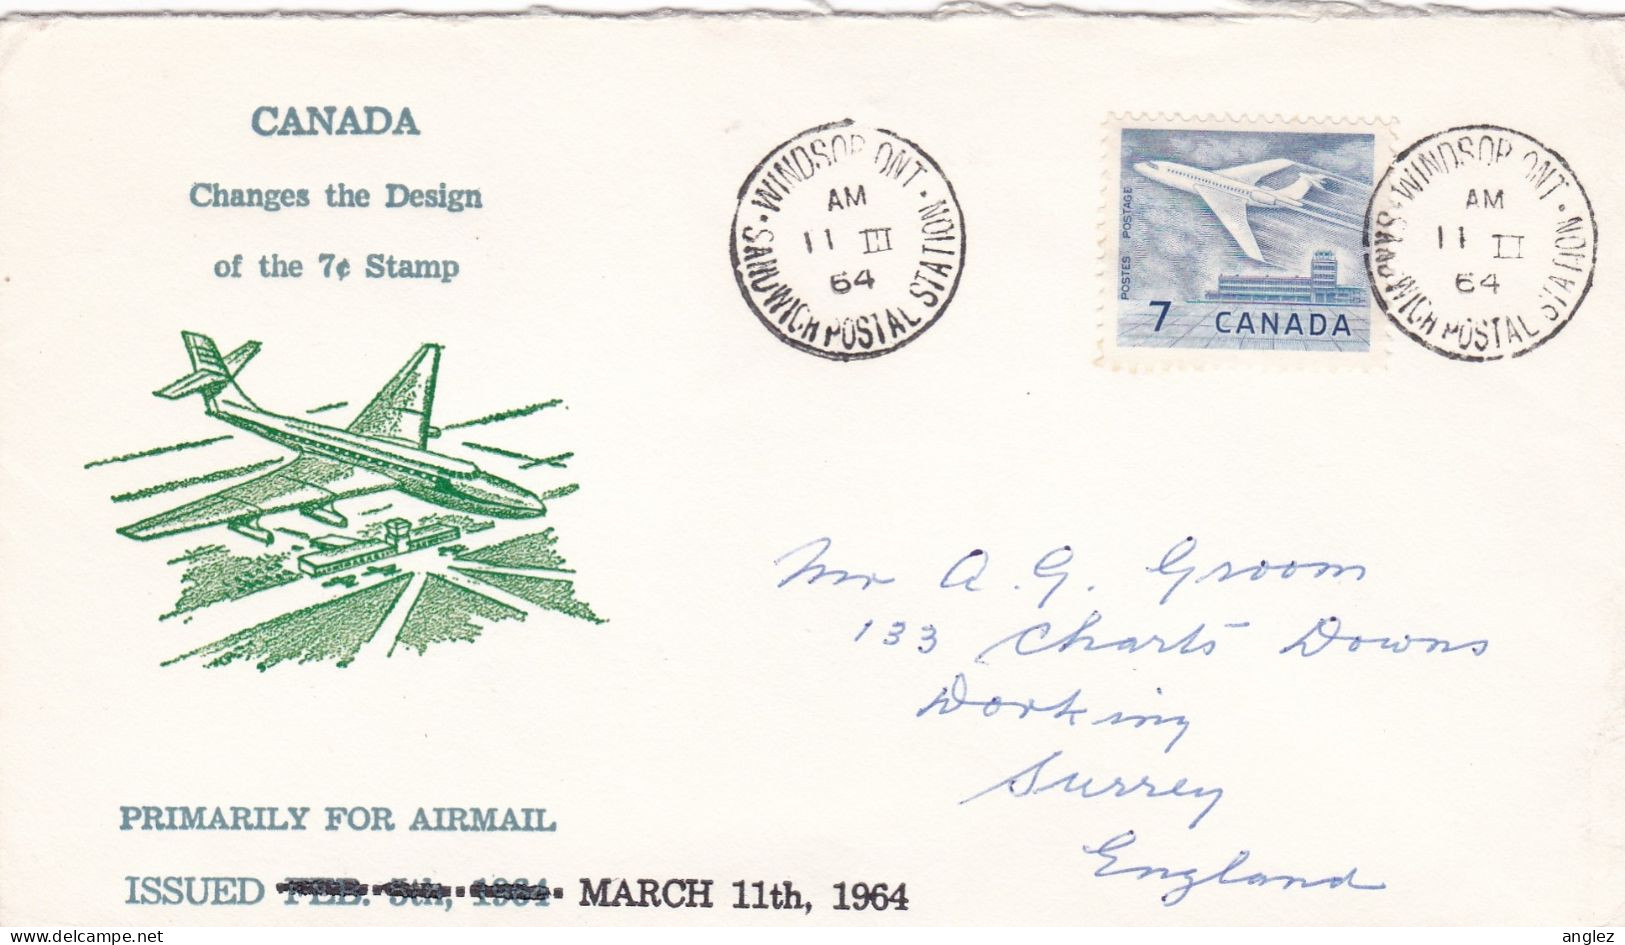 Canada - 1964 7c Airmail Stamp Changed Design Illustrated FDC - Charity Seal - Luftpost